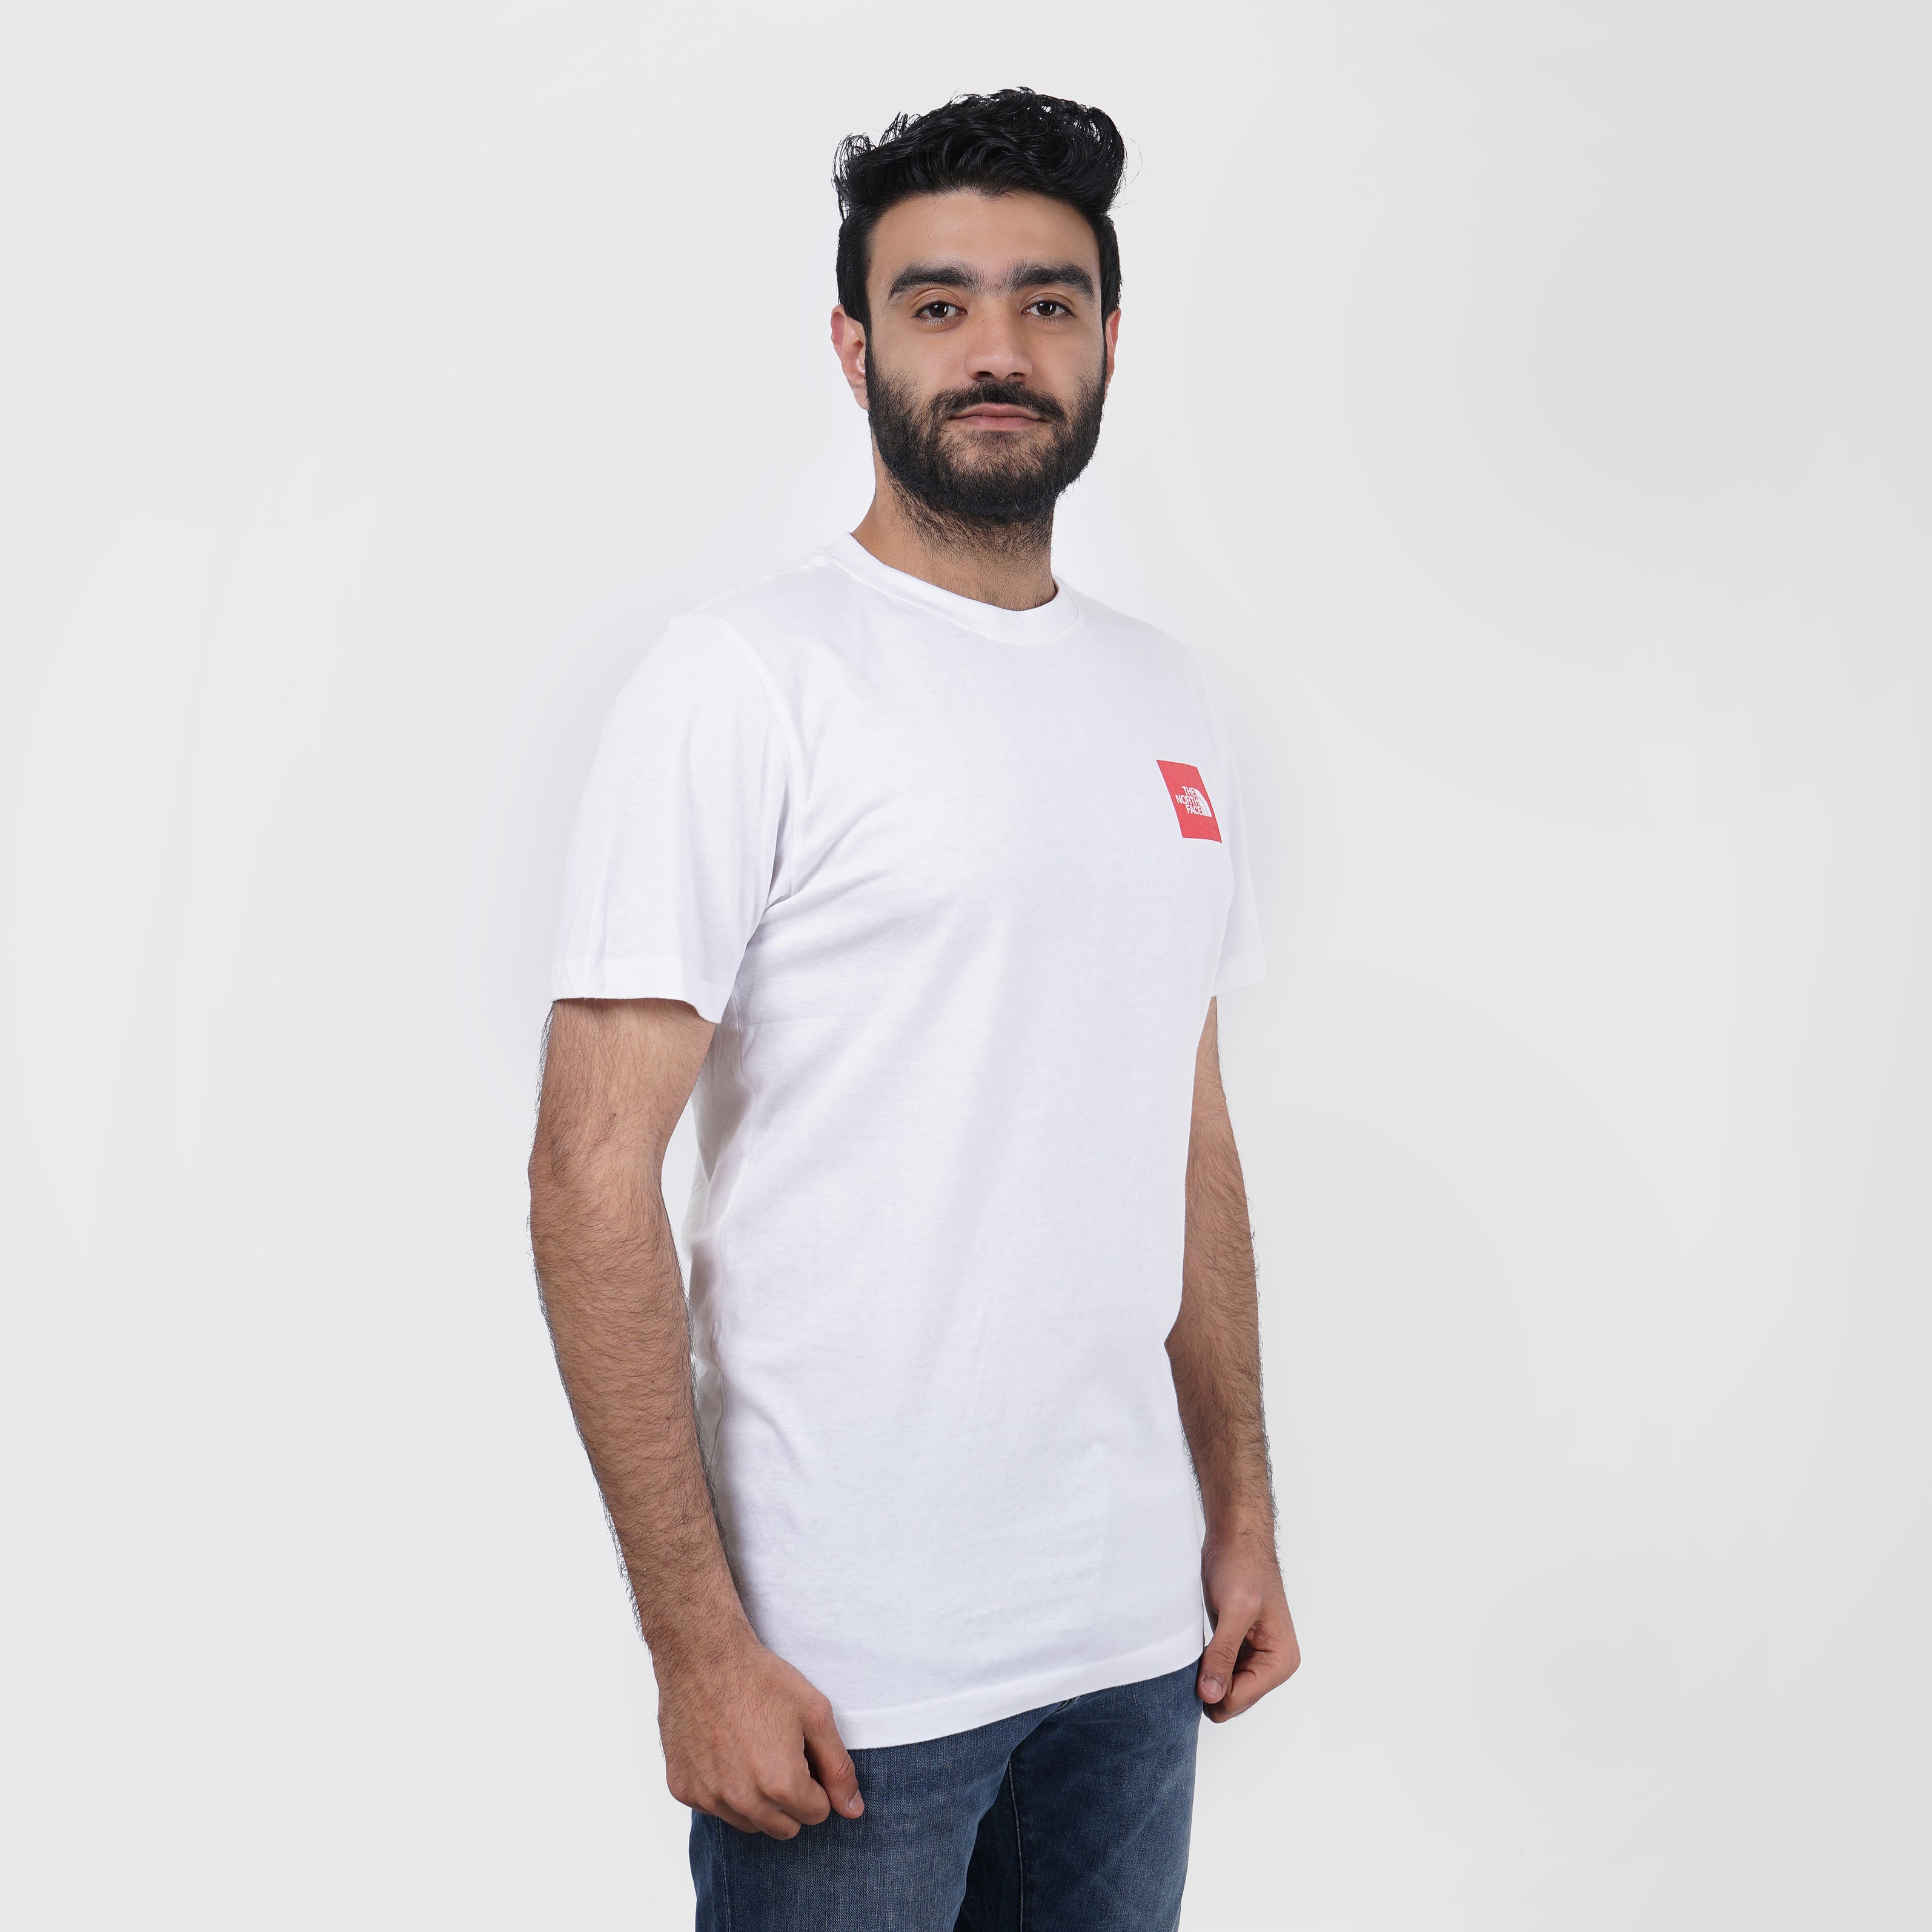 The North Face Printed White T-Shirt - Marca Deals - The North Face